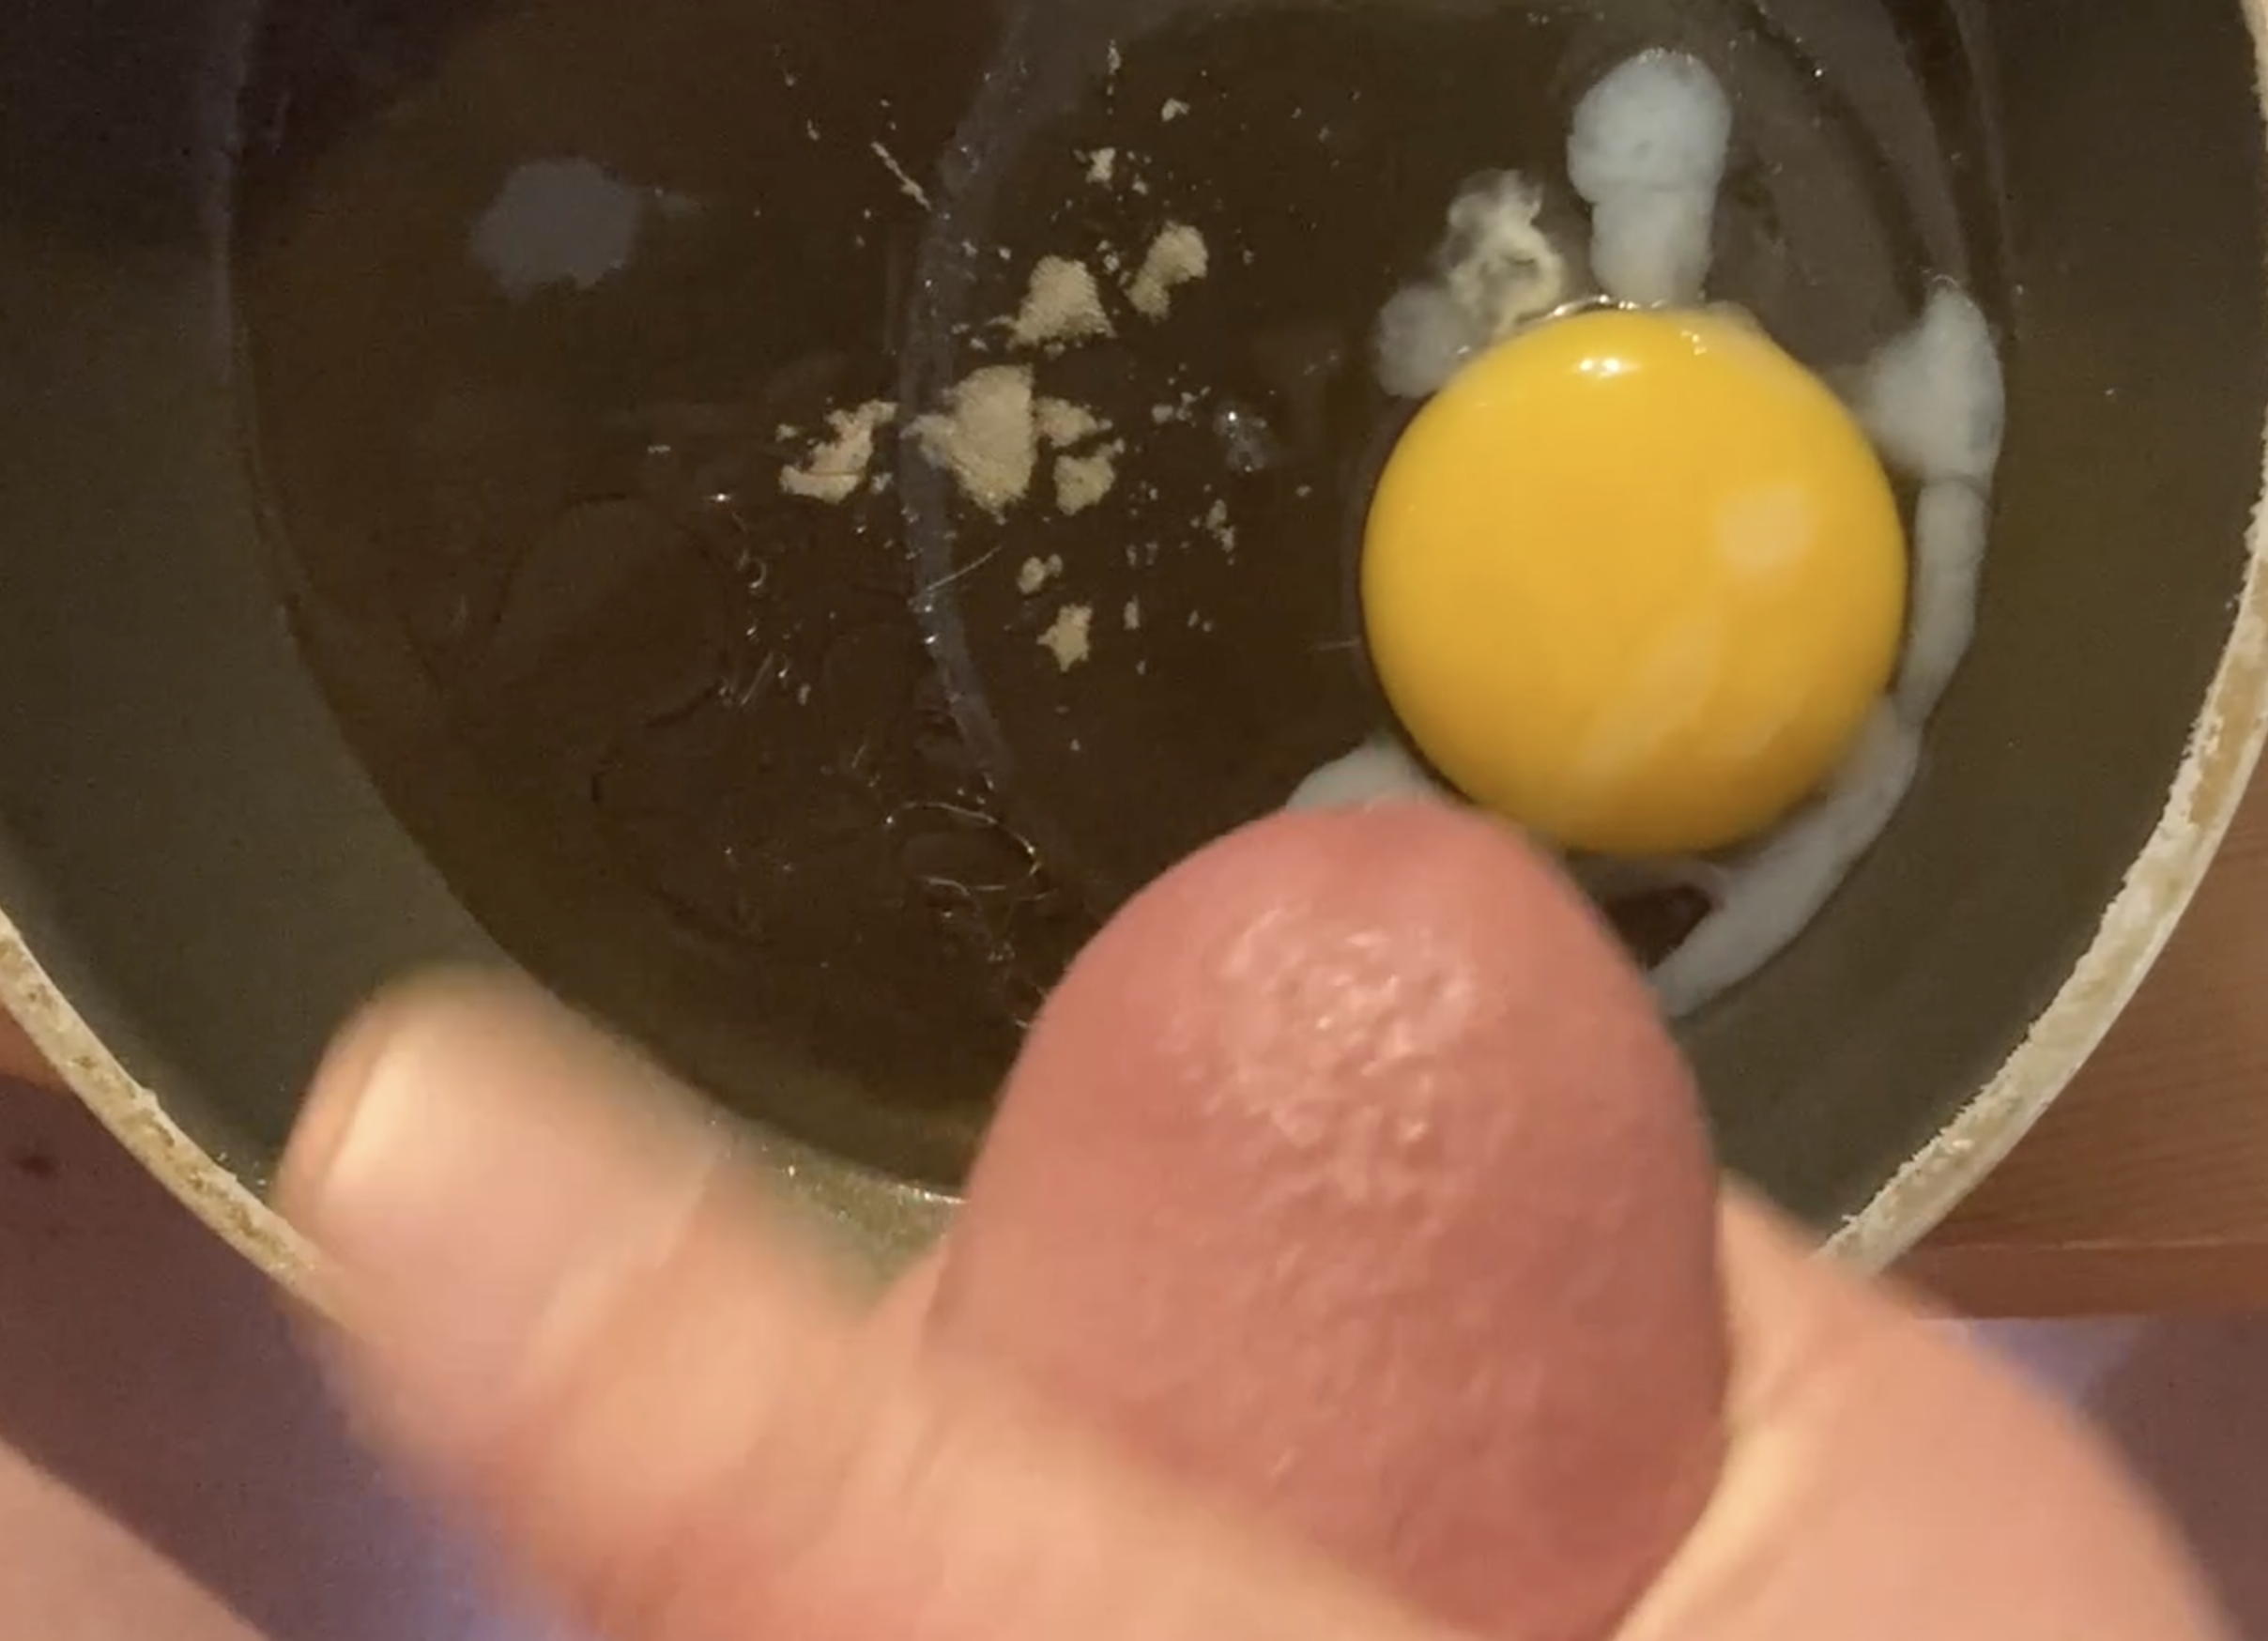 I cum on egg and fry it watching pee pussy